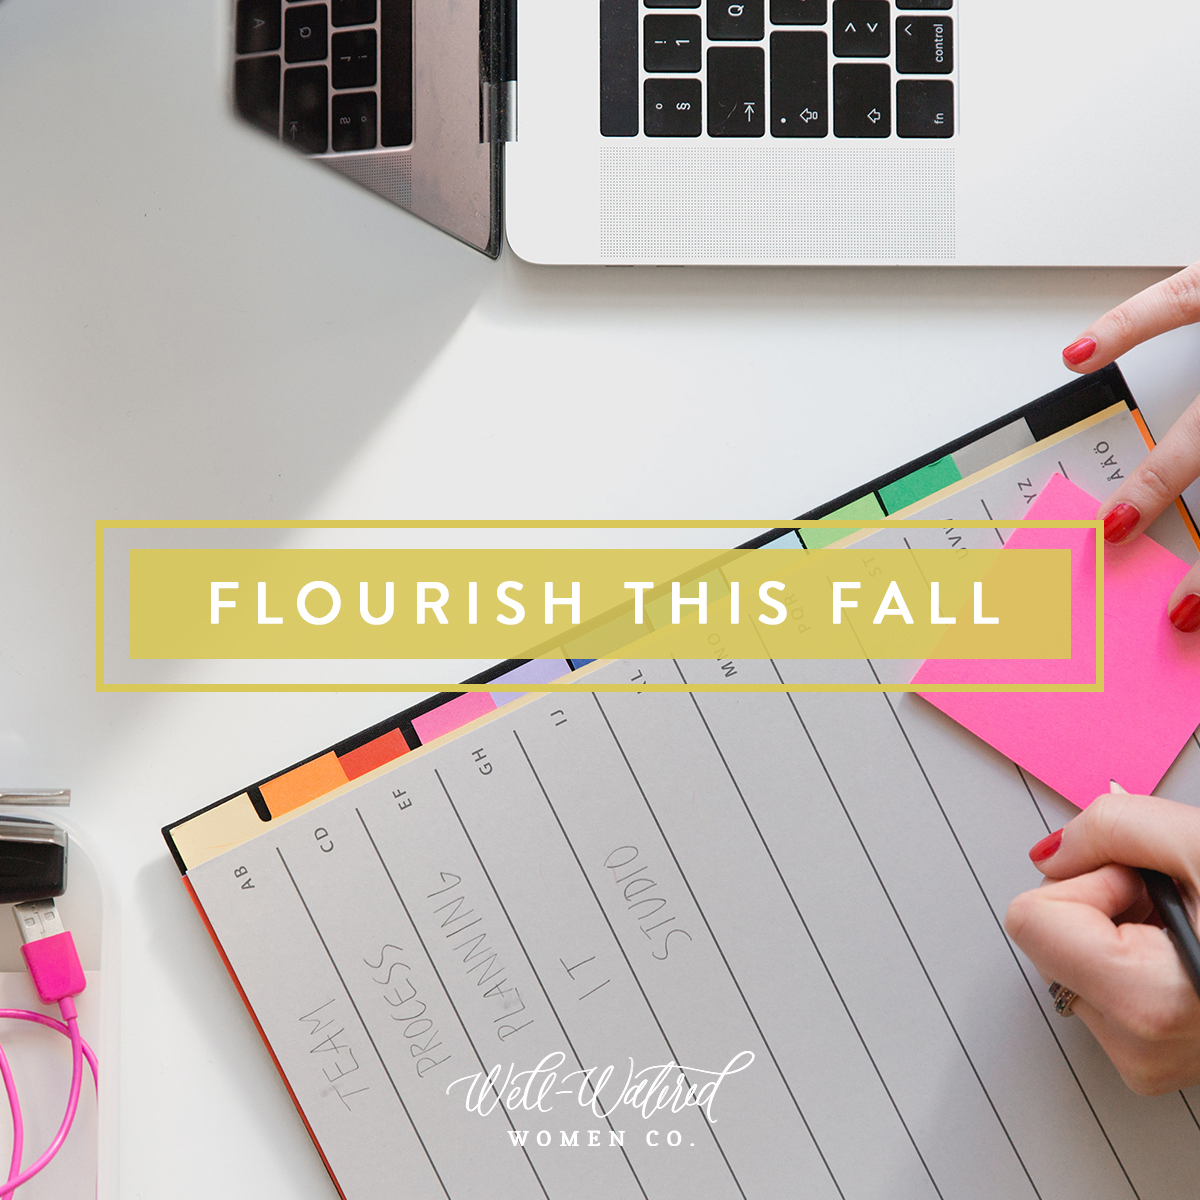 How to Flourish This Fall: Practical tips for thriving, not surviving as a Christian Woman (Back to school tips for your family!)